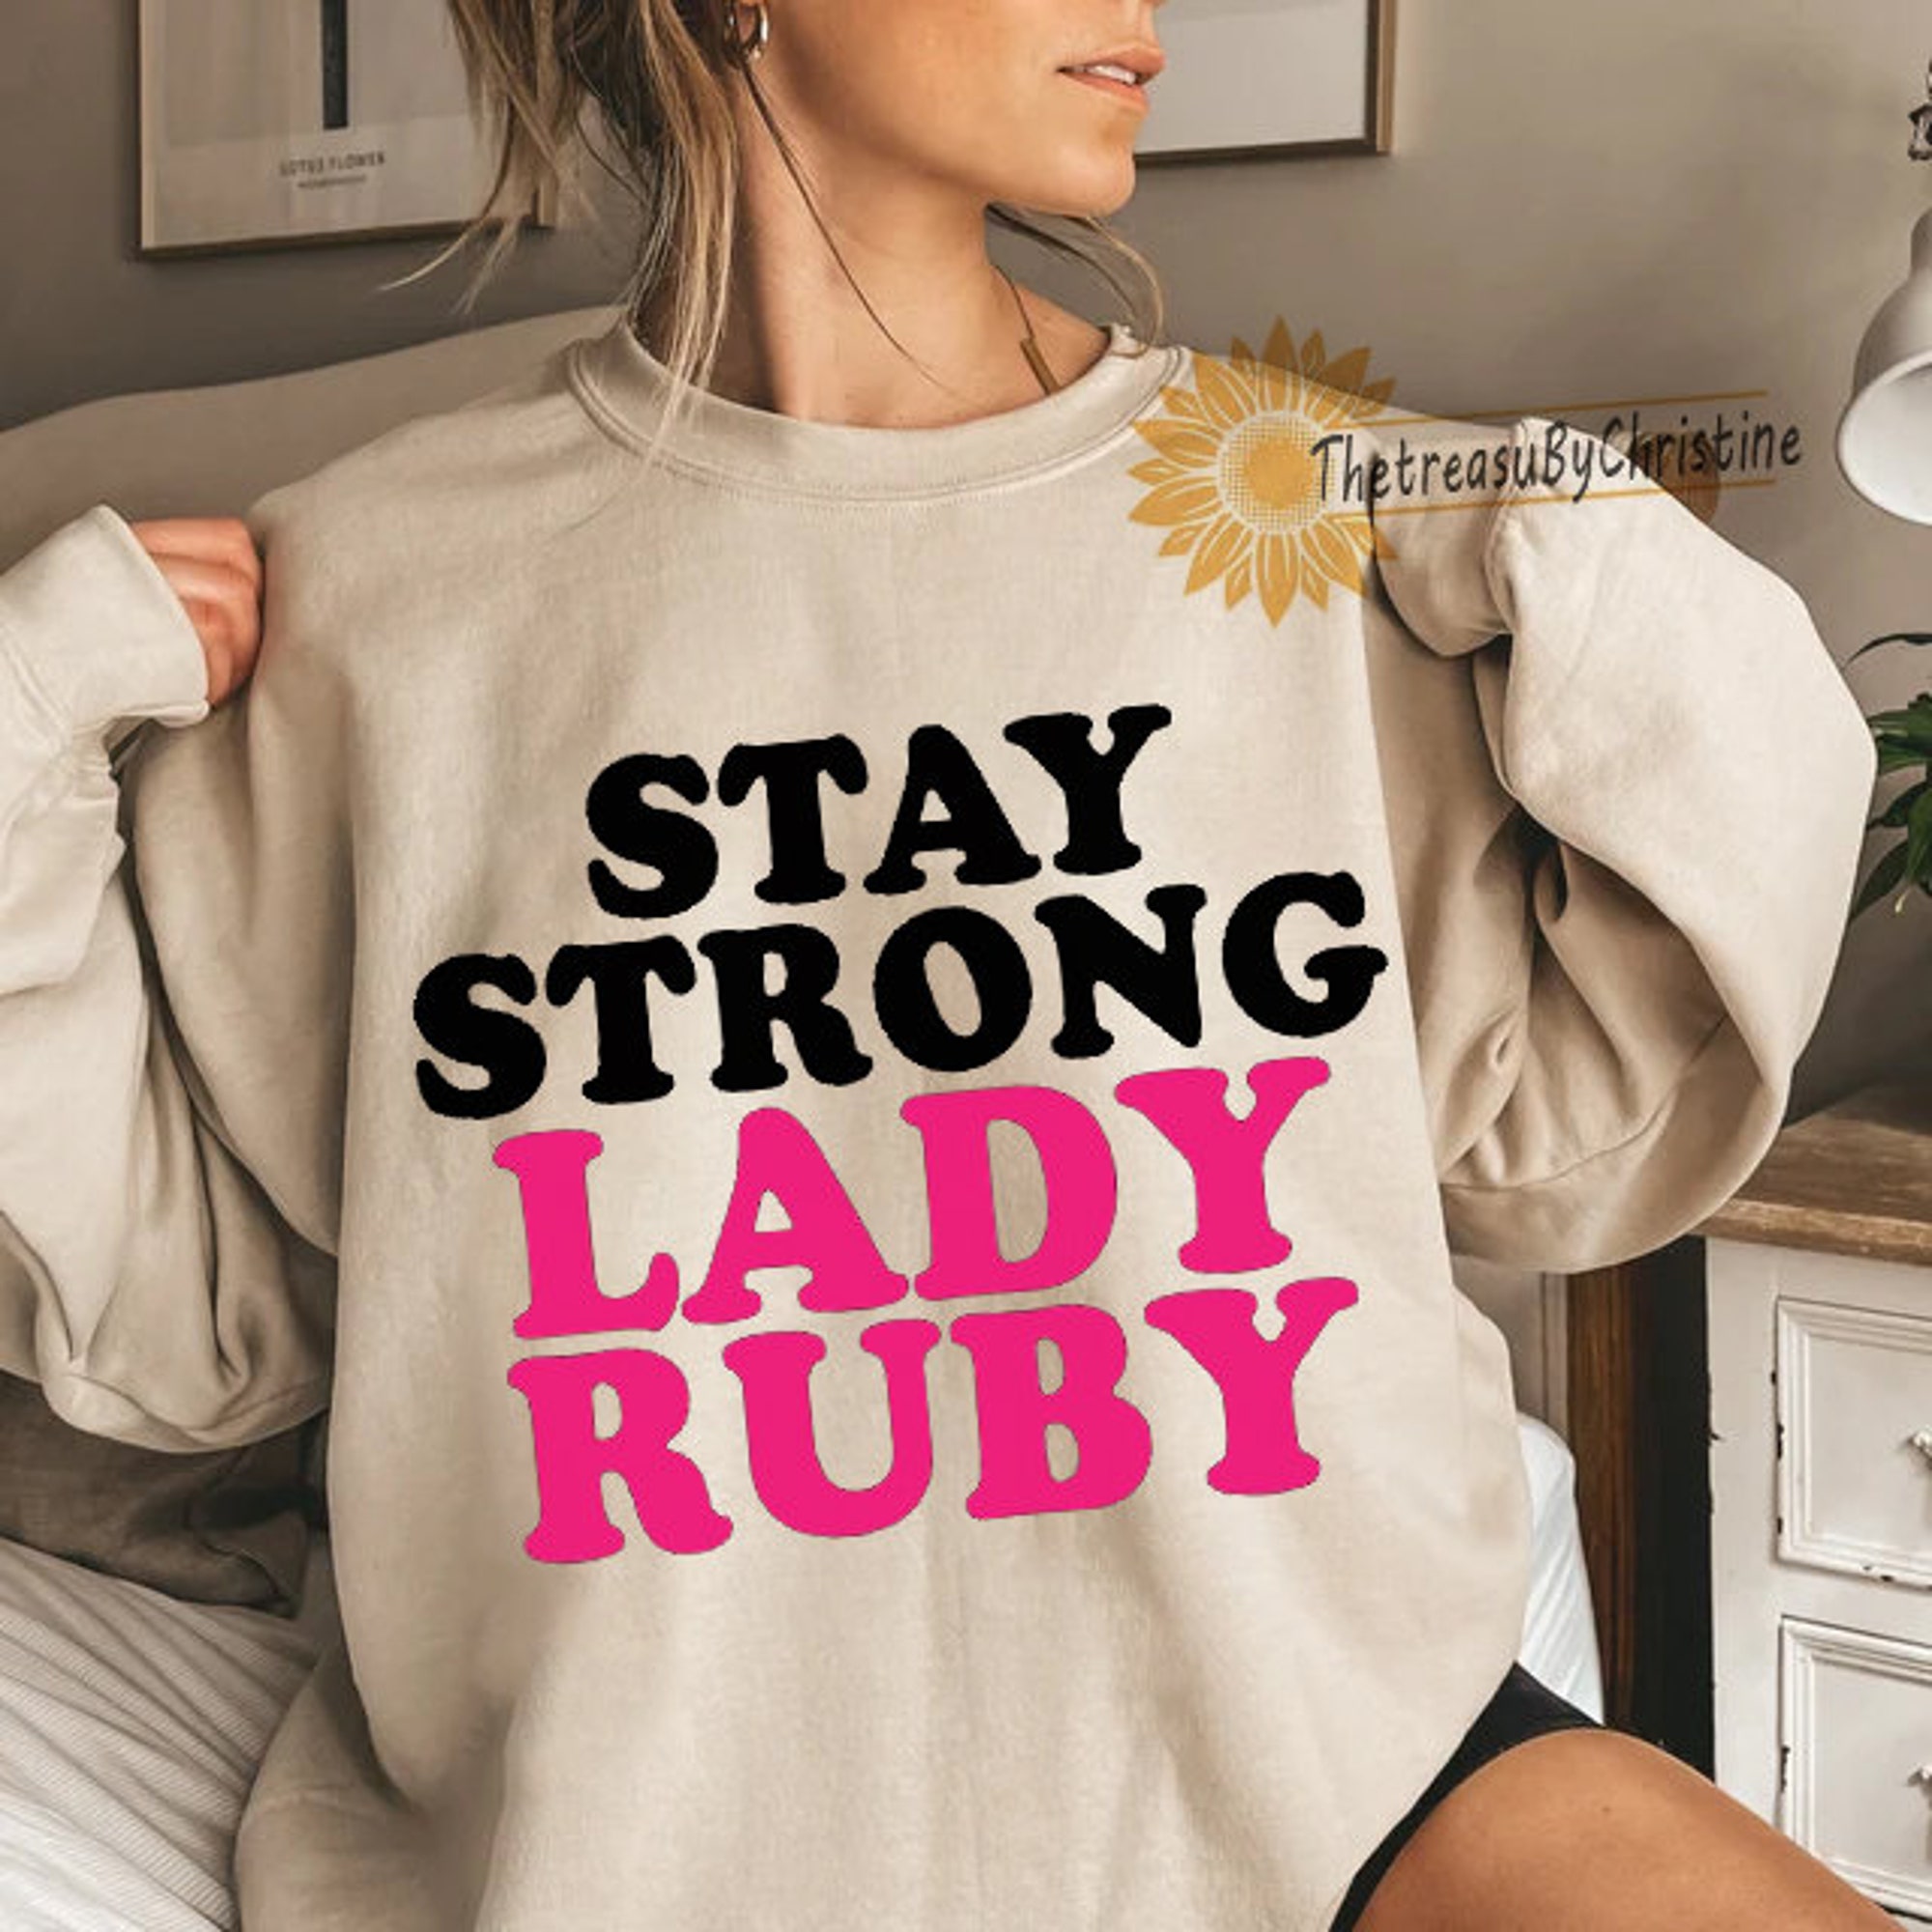 Stay Strong Lady Ruby Shirt, Justice For Lady Ruby, Freeman Ladies Shirt